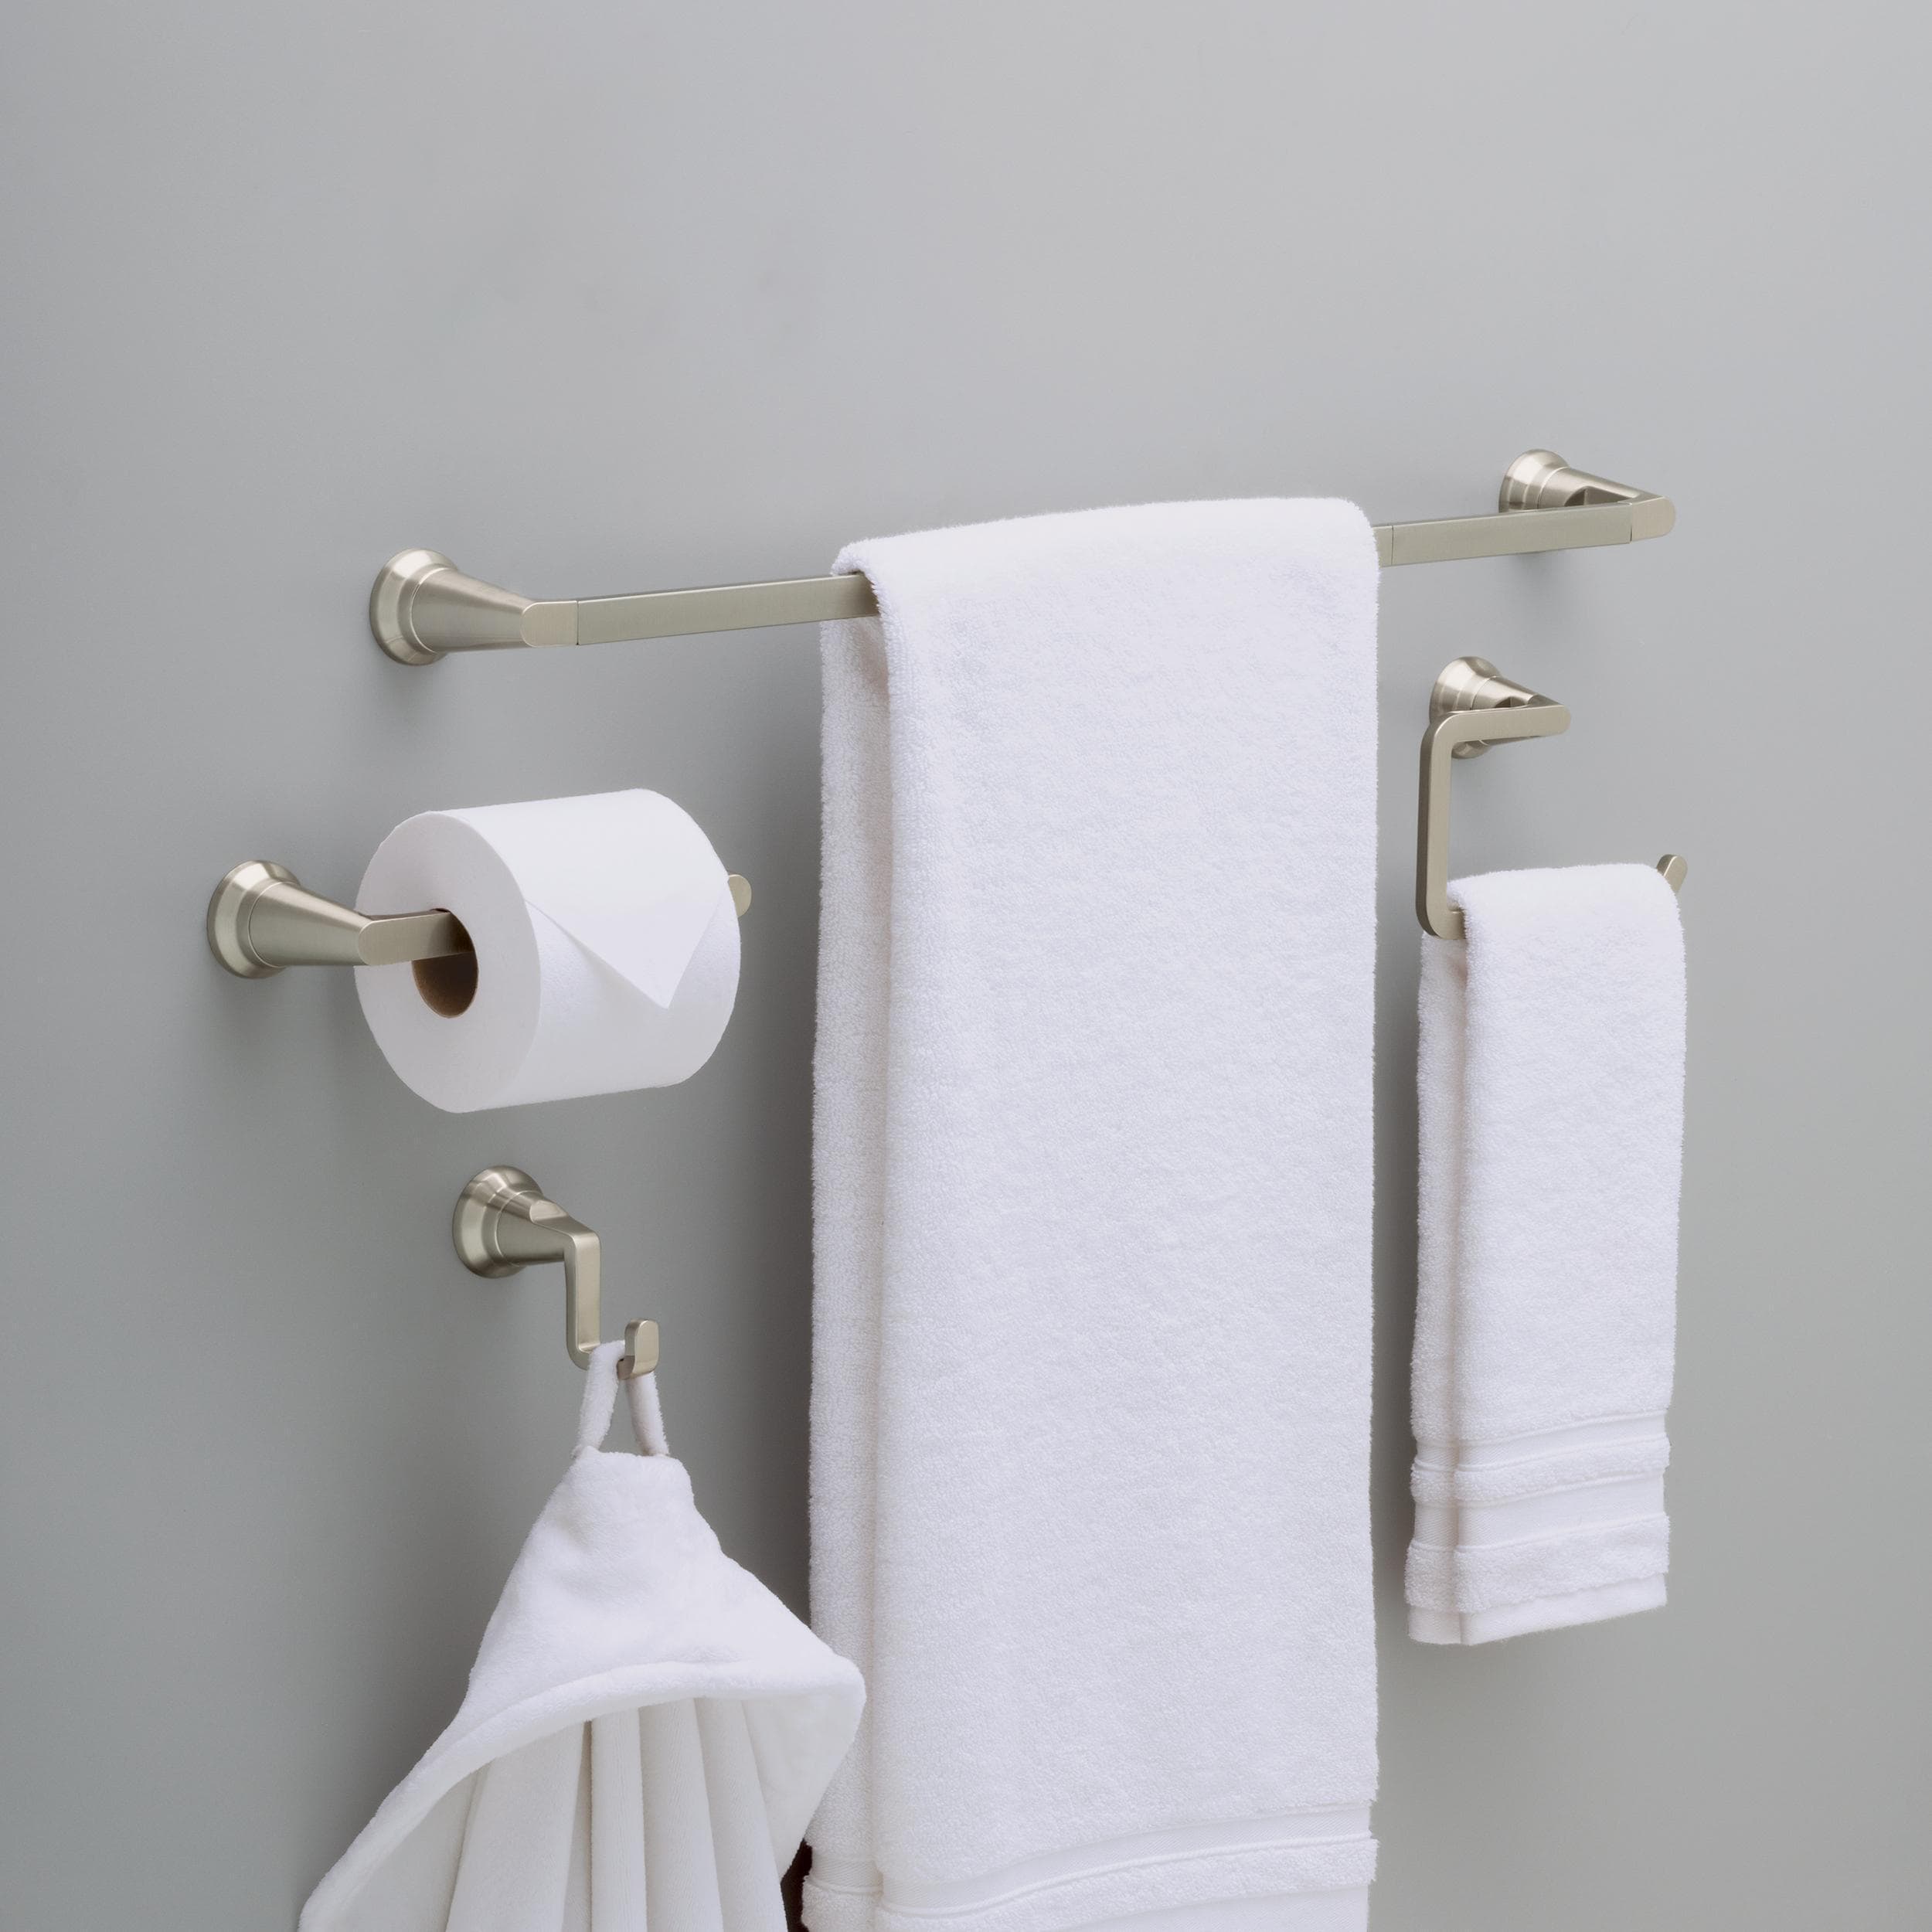 Where Should A Hand Towel Ring Be Placed | Storables